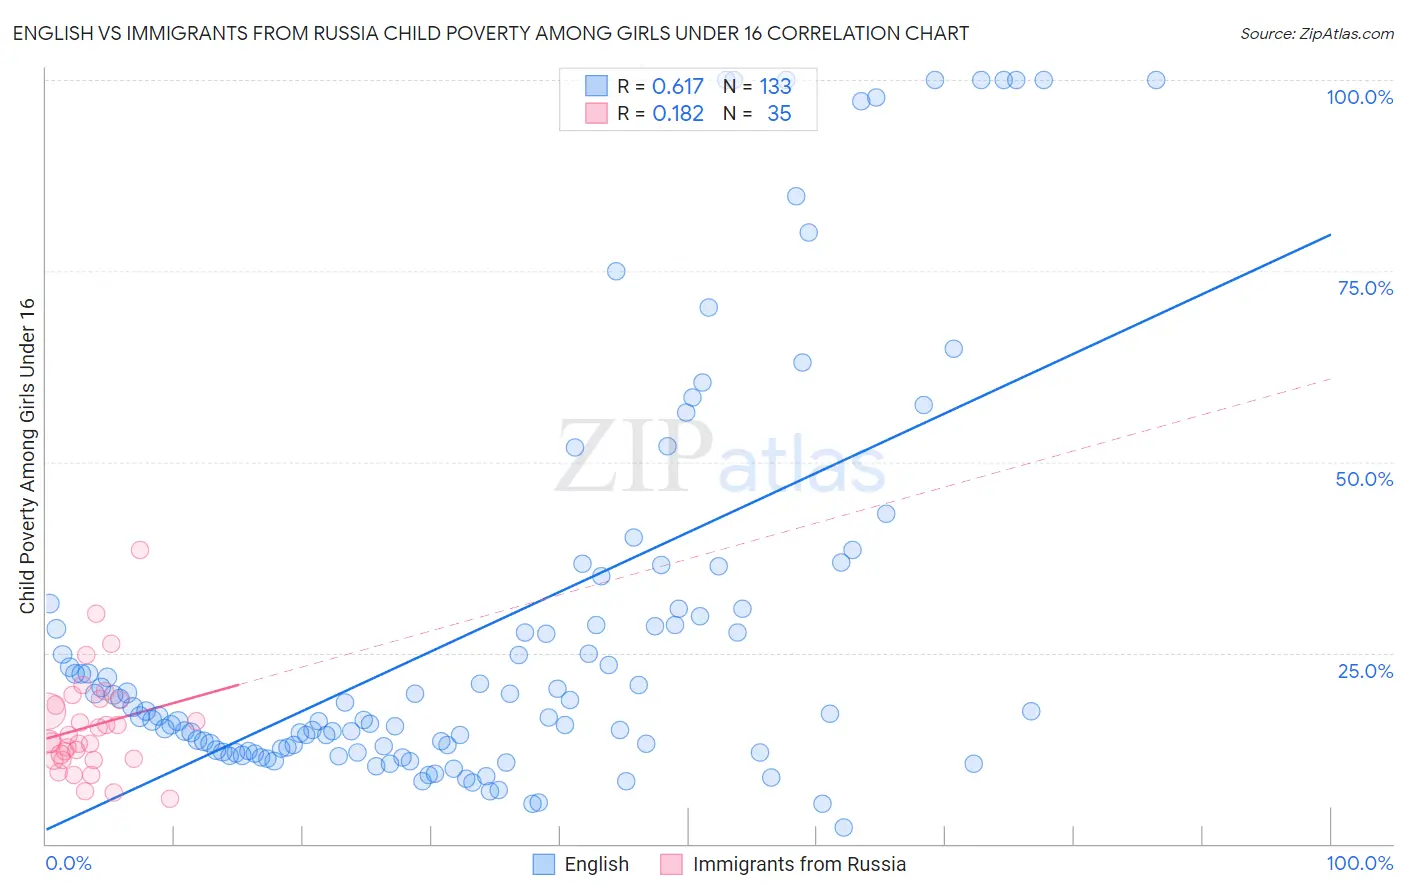 English vs Immigrants from Russia Child Poverty Among Girls Under 16